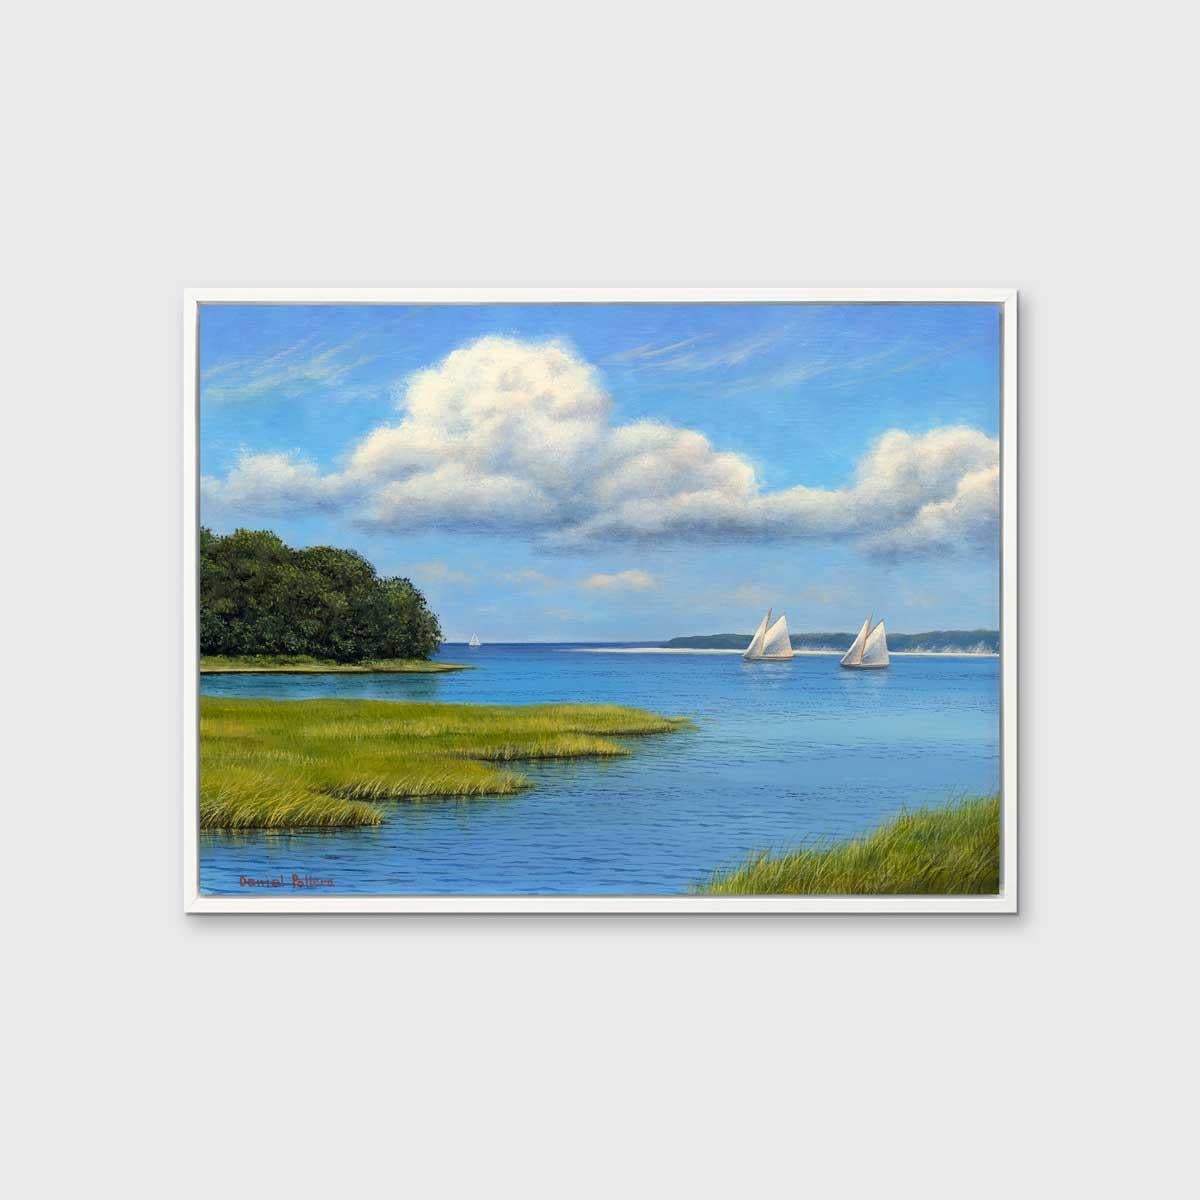 This traditional seascape Limited Edition print by Daniel Pollera captures a coastal summer scene with swaying grass in what appears to be a bay. Sailboats with white sails are visible along the horizon in bright blue water, which is mirrored by a